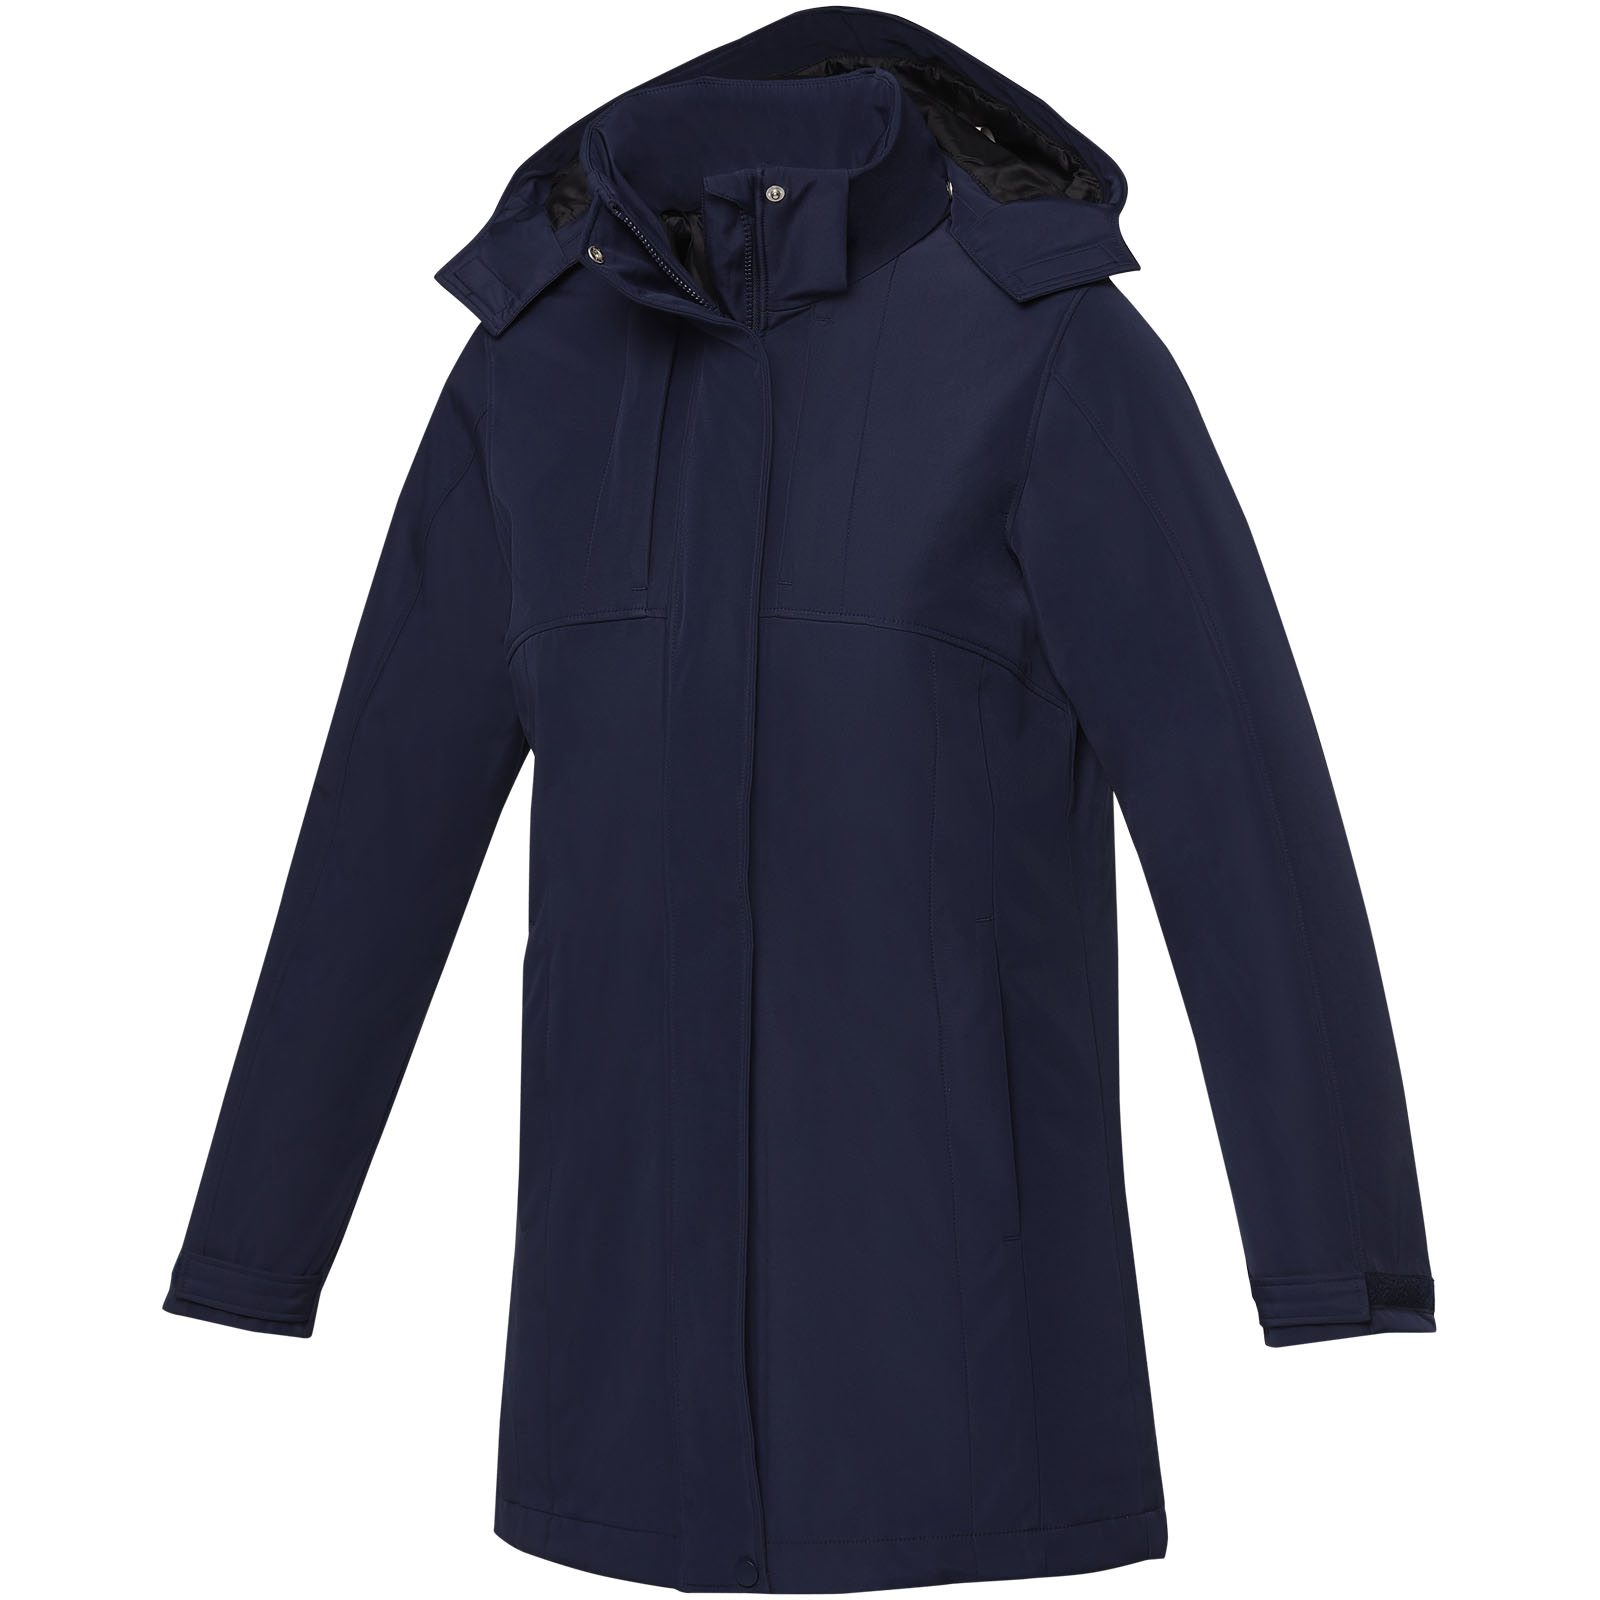 Advertising Jackets - Hardy women's insulated parka - 0